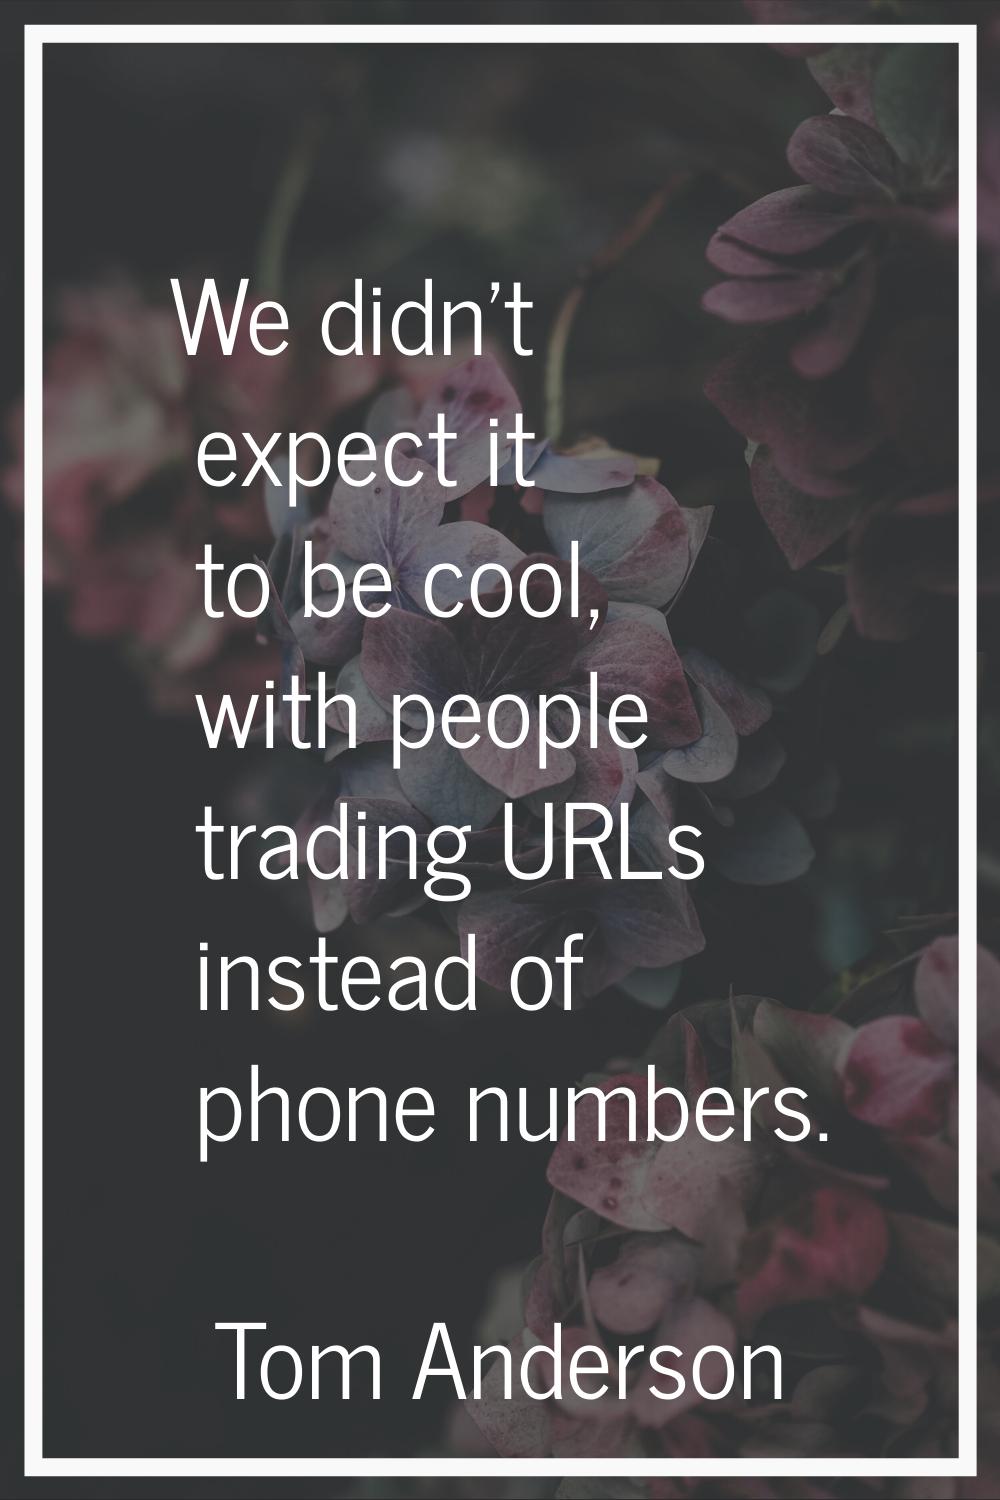 We didn't expect it to be cool, with people trading URLs instead of phone numbers.